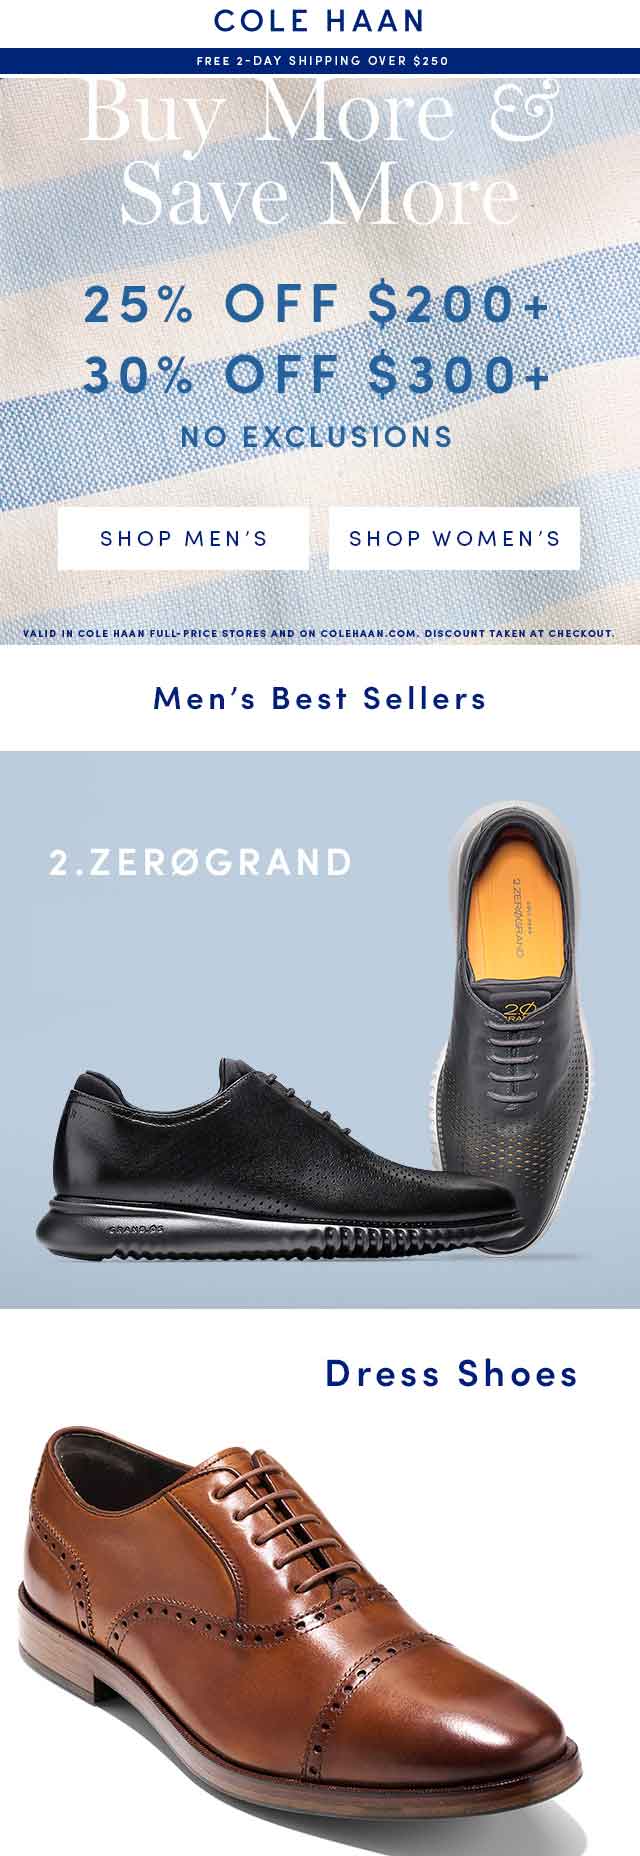 Cole Haan Coupons 🛒 Shopping Deals & Promo Codes January 2020 🆓